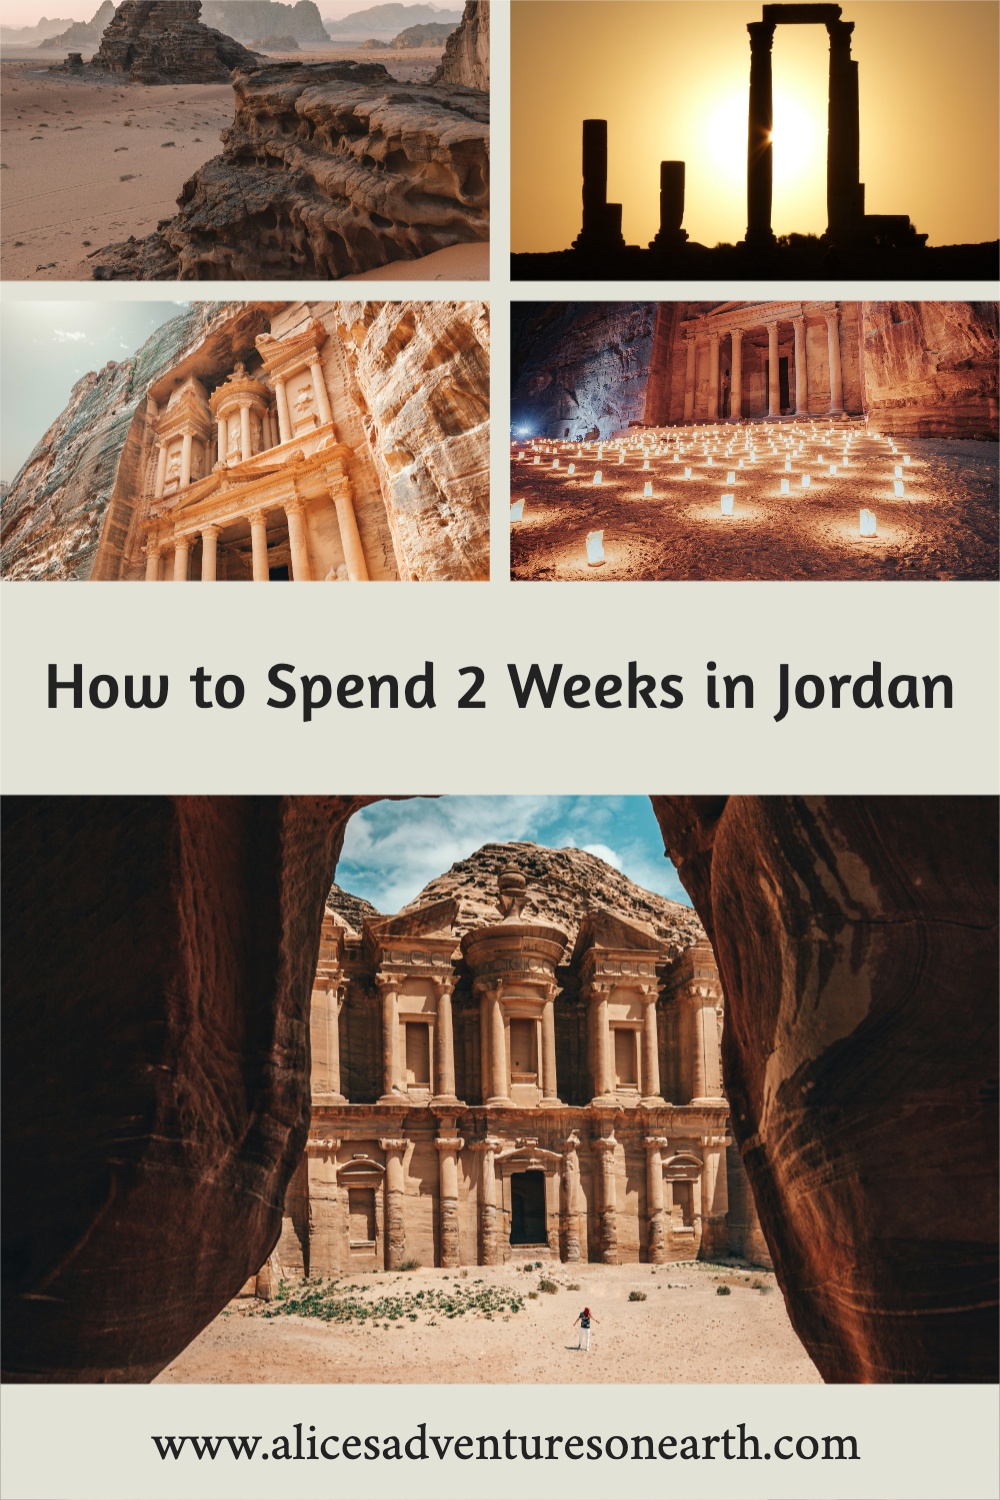 From Amman, to Petra and Aqaba Here are the highlights on spending two weeks in Jordan<br />
#adventureisJordan